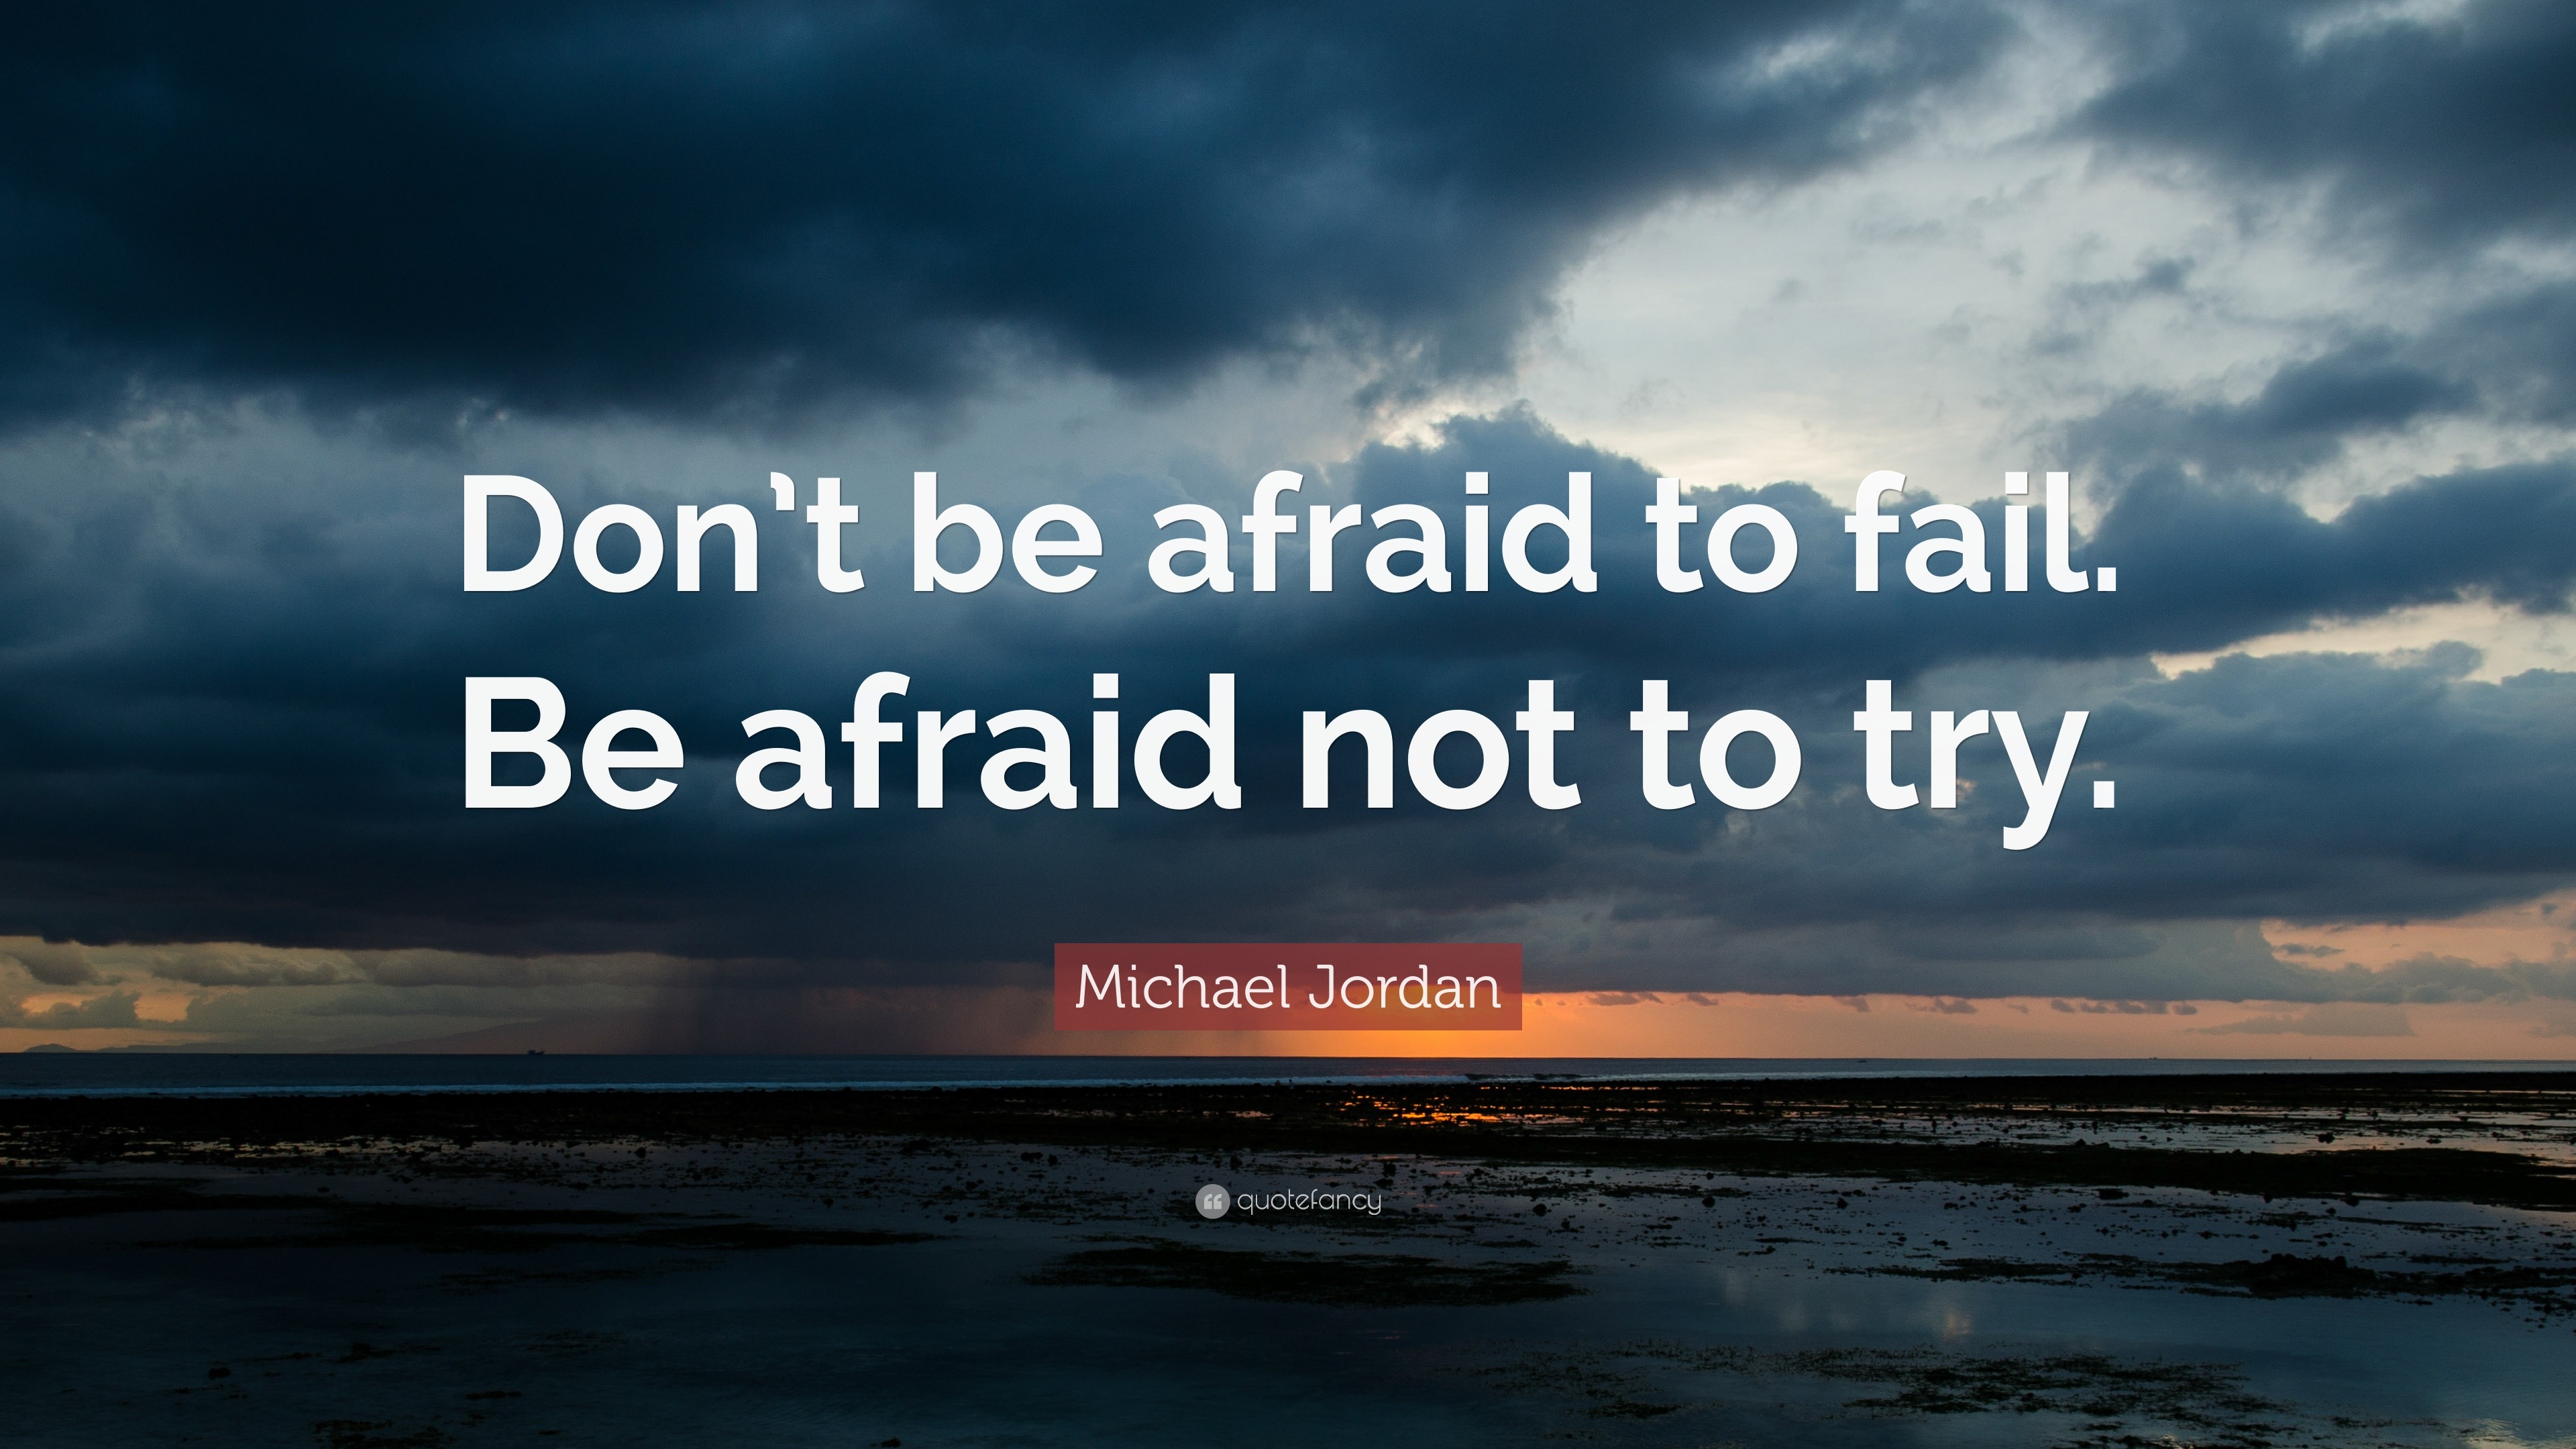 Michael Jordan Quote: “Don’t be afraid to fail. Be afraid not to try